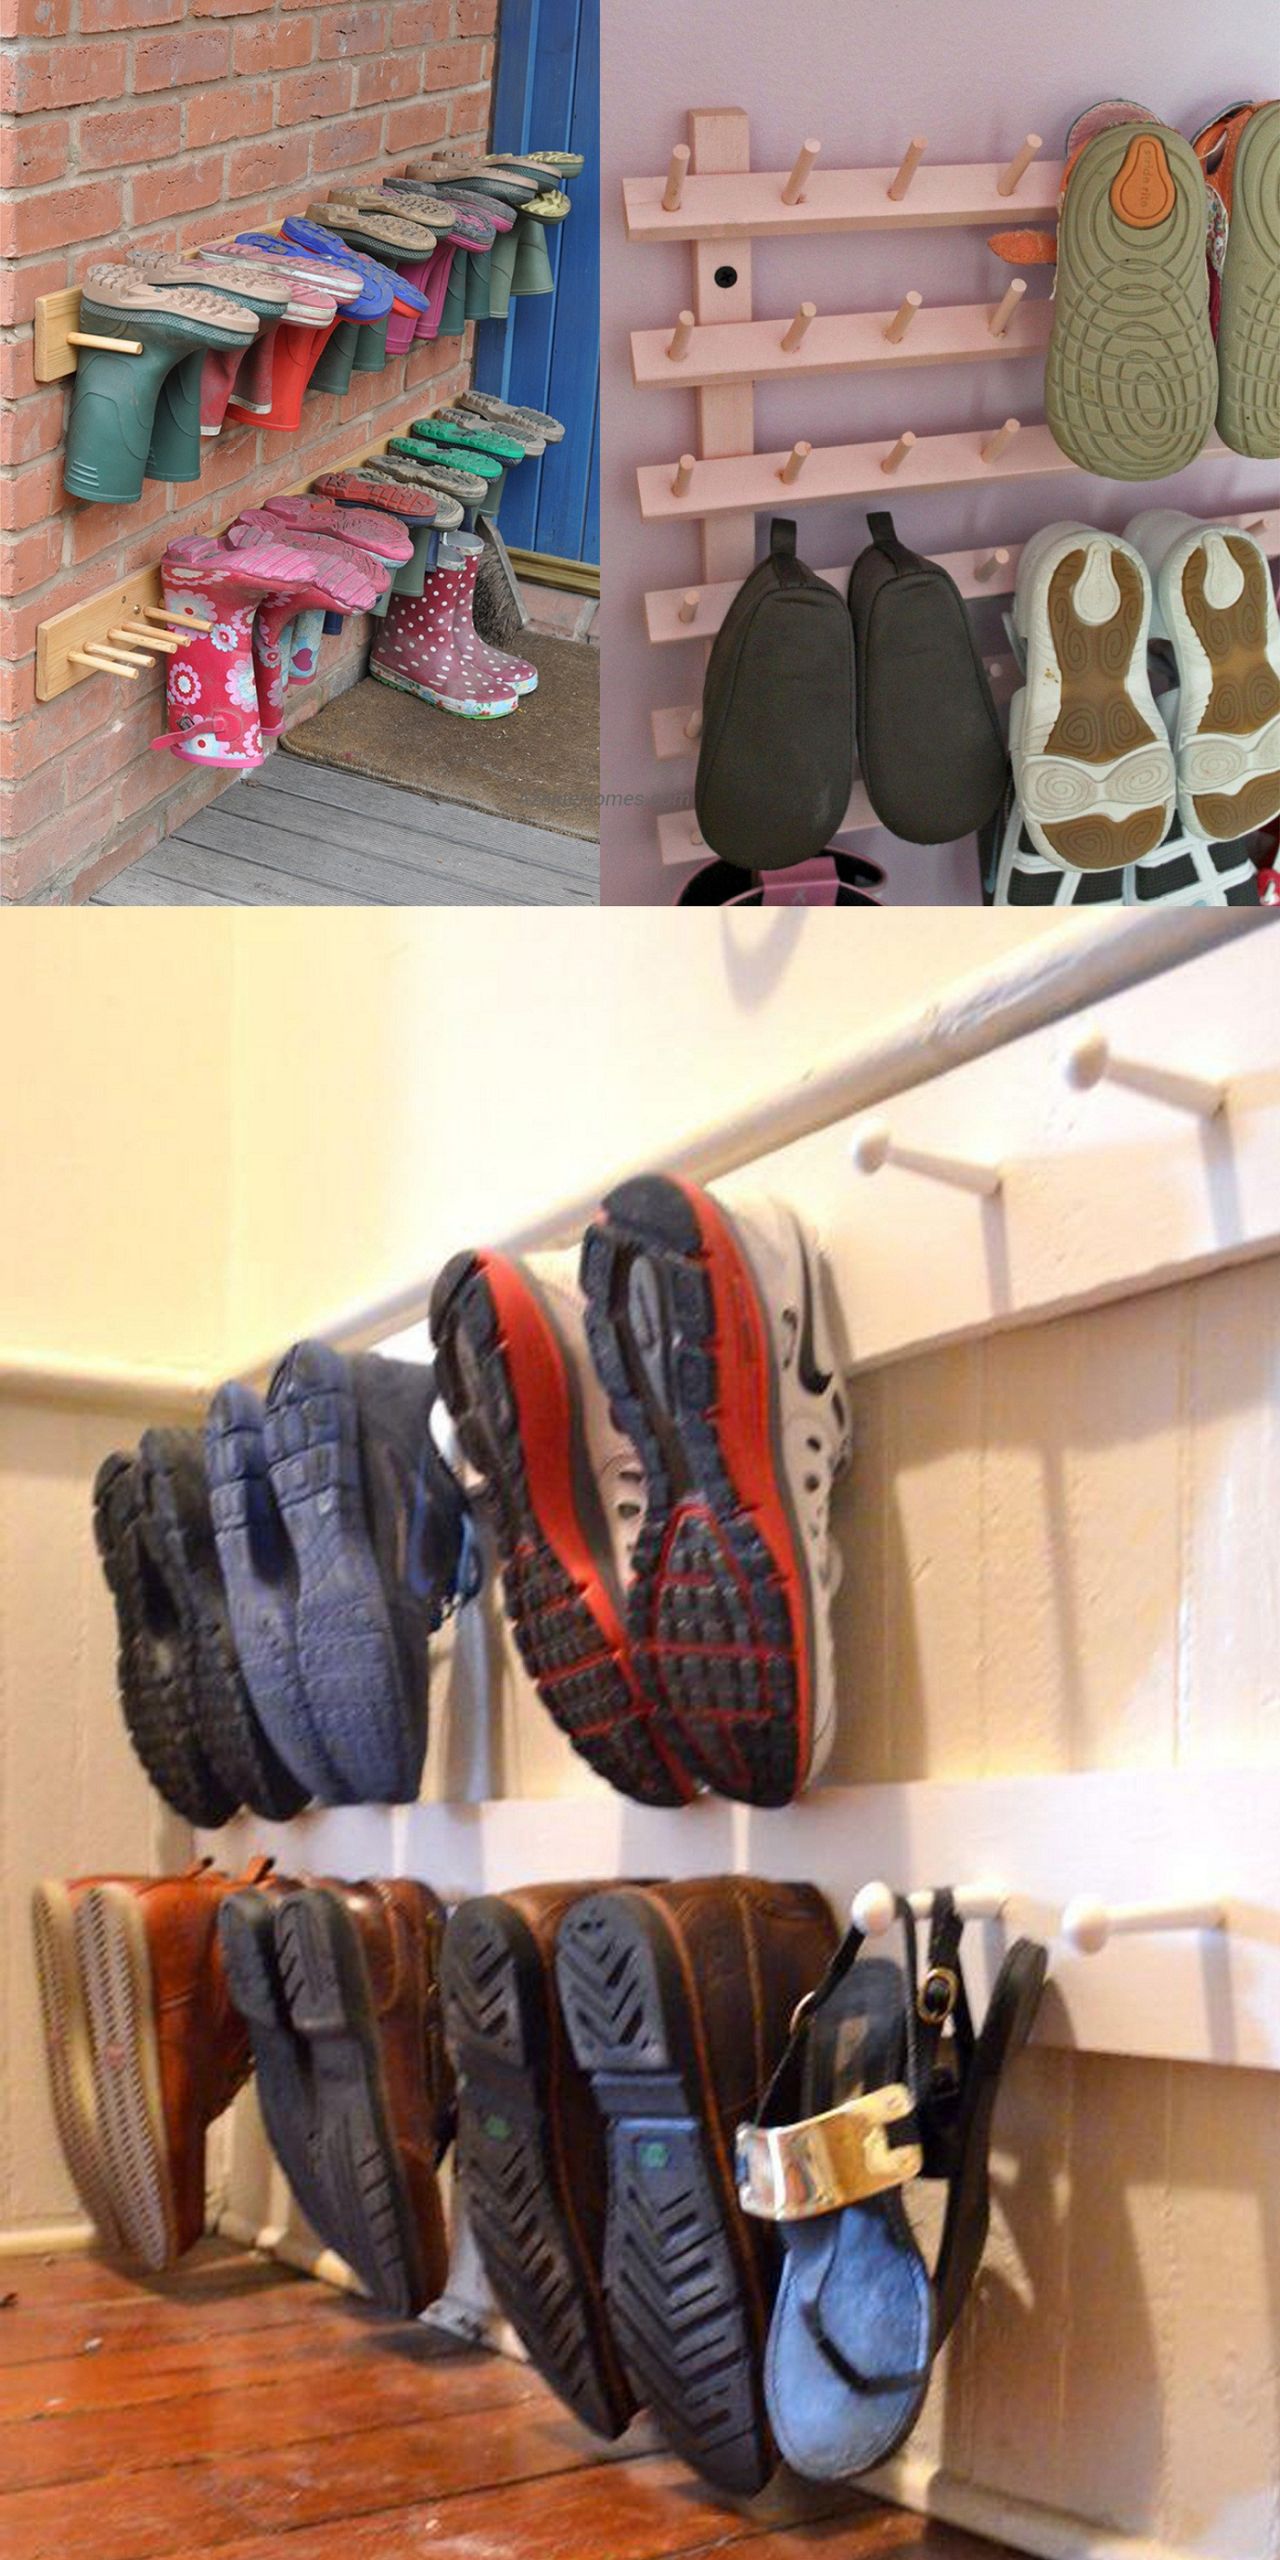 DIY Shoe Organizer For Small Closet
 How to Organize Shoes in a Small Closet with Installing